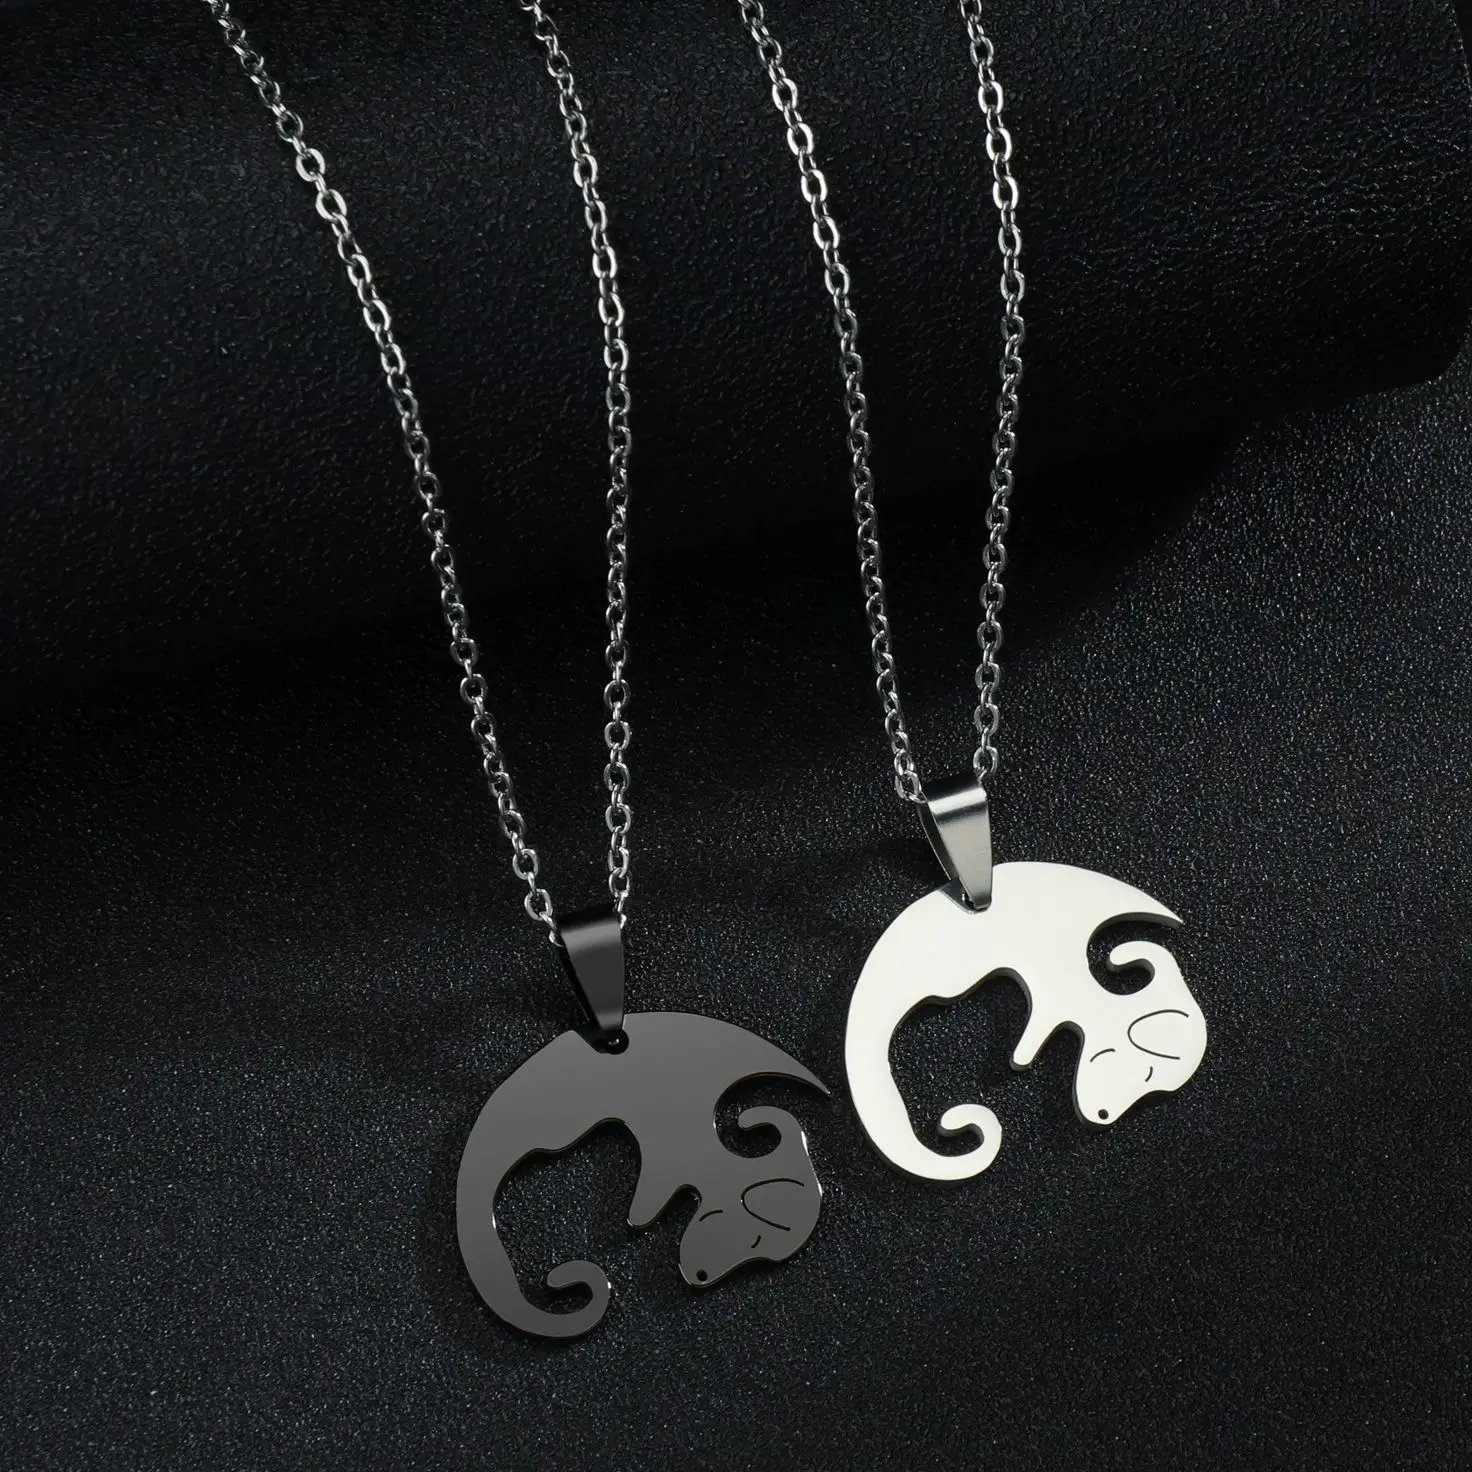 

2 Pcs Animal Pendant Black Silvery Dog Stitching Necklaces Simple Friendship Gift Cute Couple Jewelry Necklace Valentine's Day